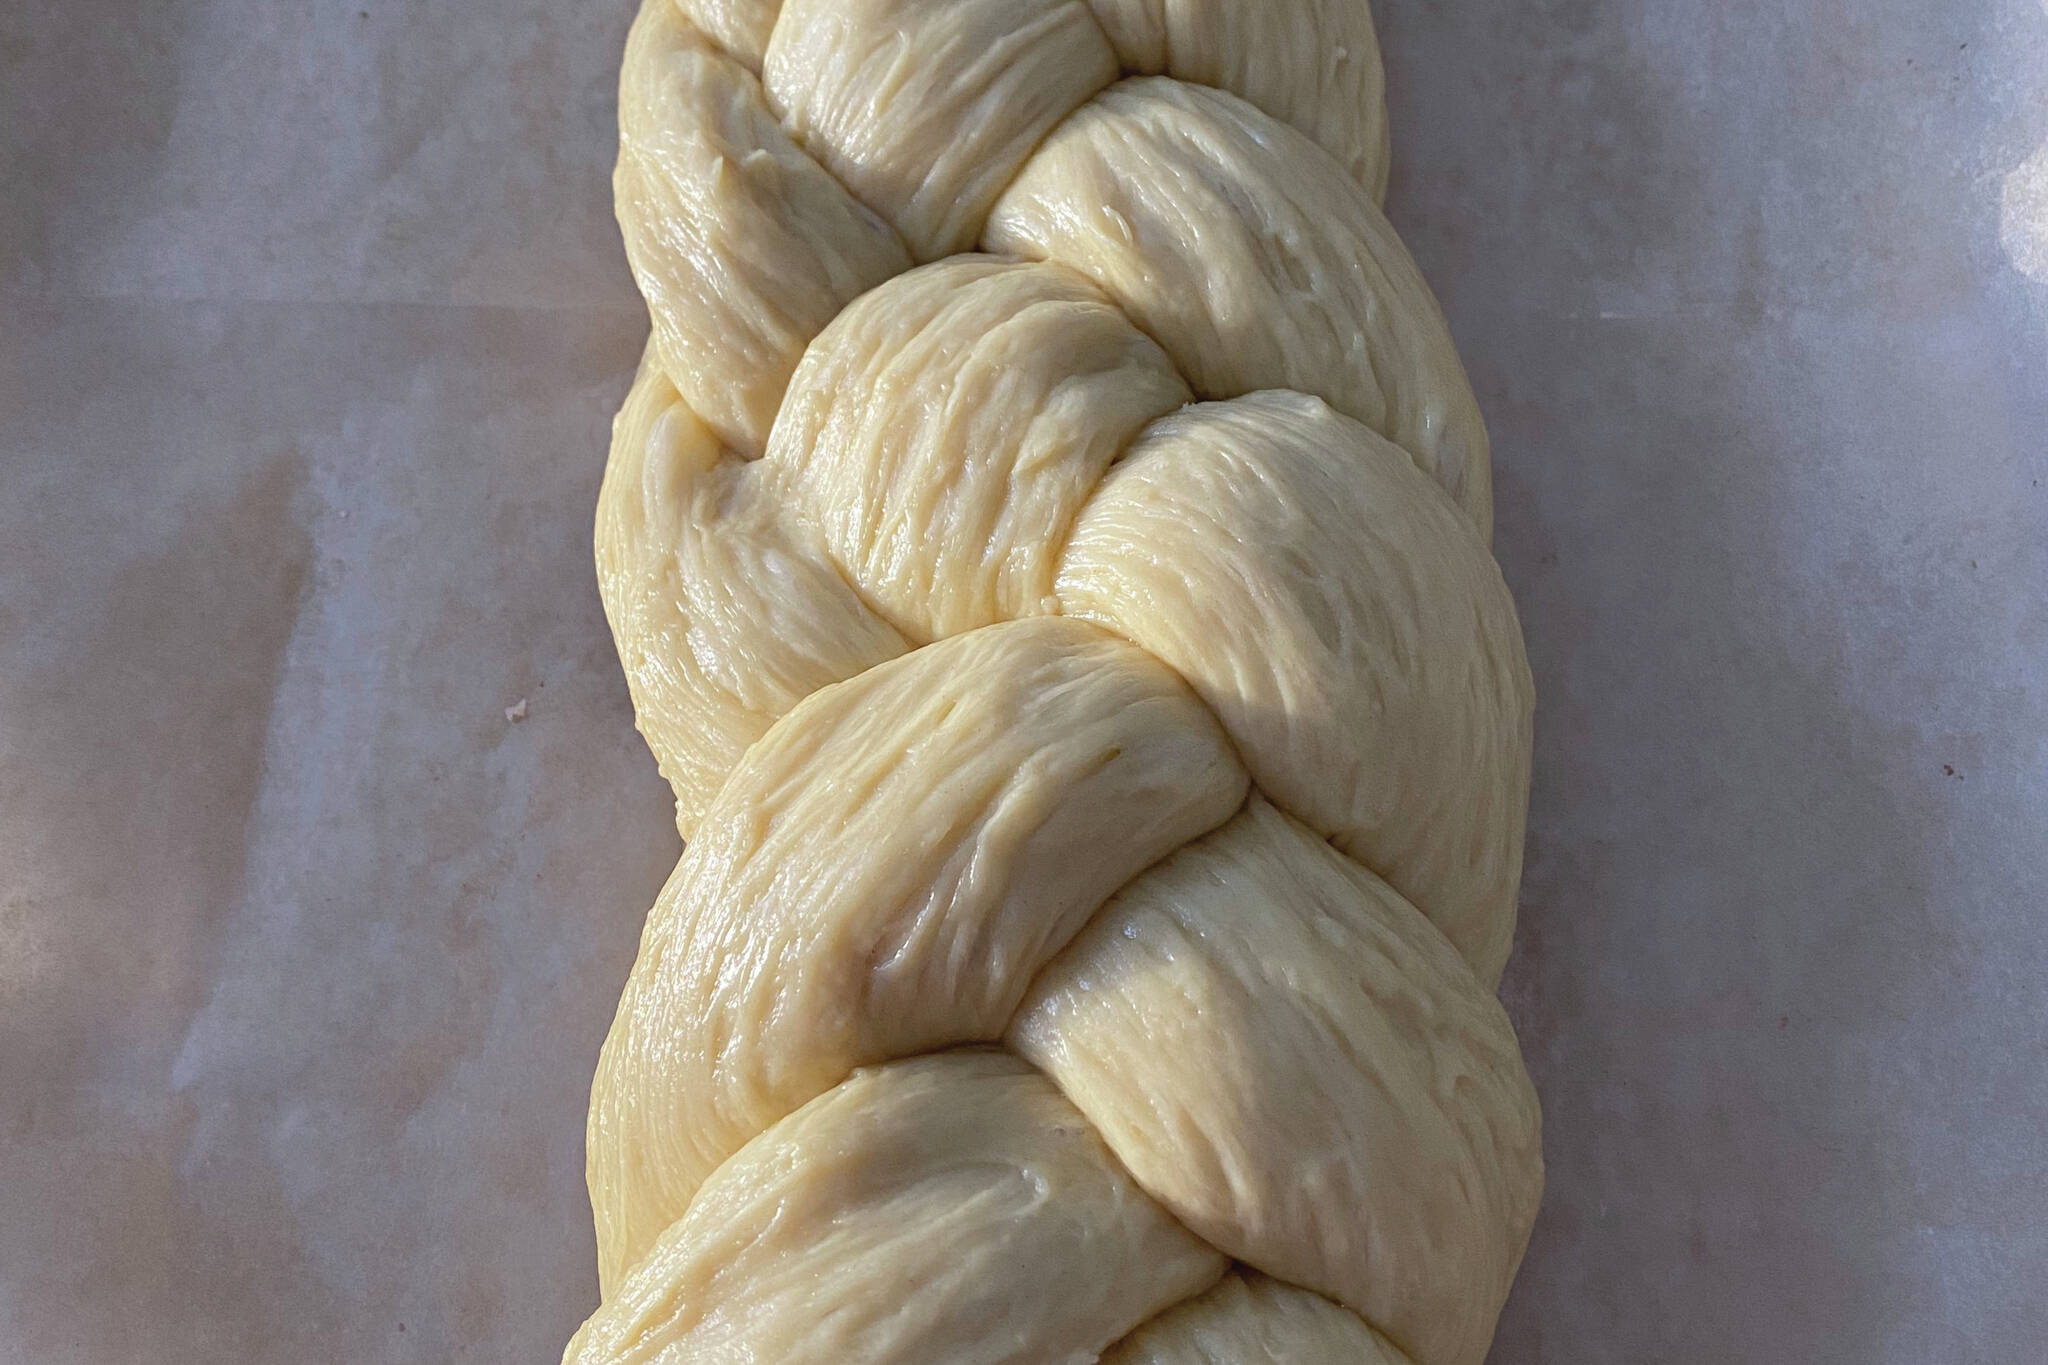 This decadent brioche dough is made rich with eggs and warm milk. (Photo by Tressa Dale/Peninsula Clarion)